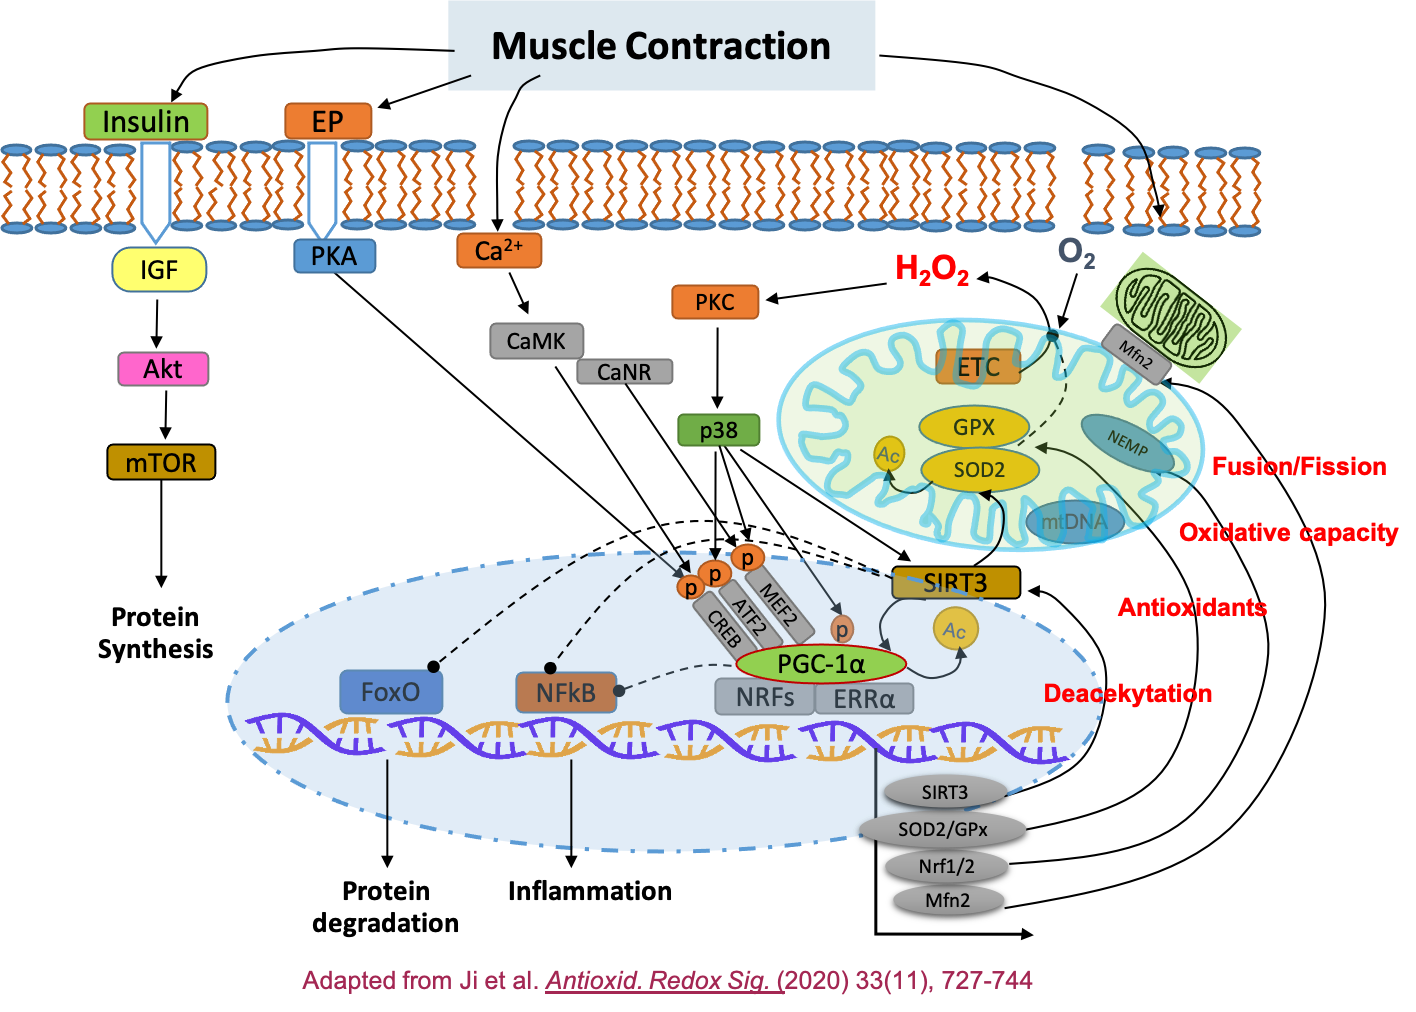 Muscle contraction and mitochondrial adaptations